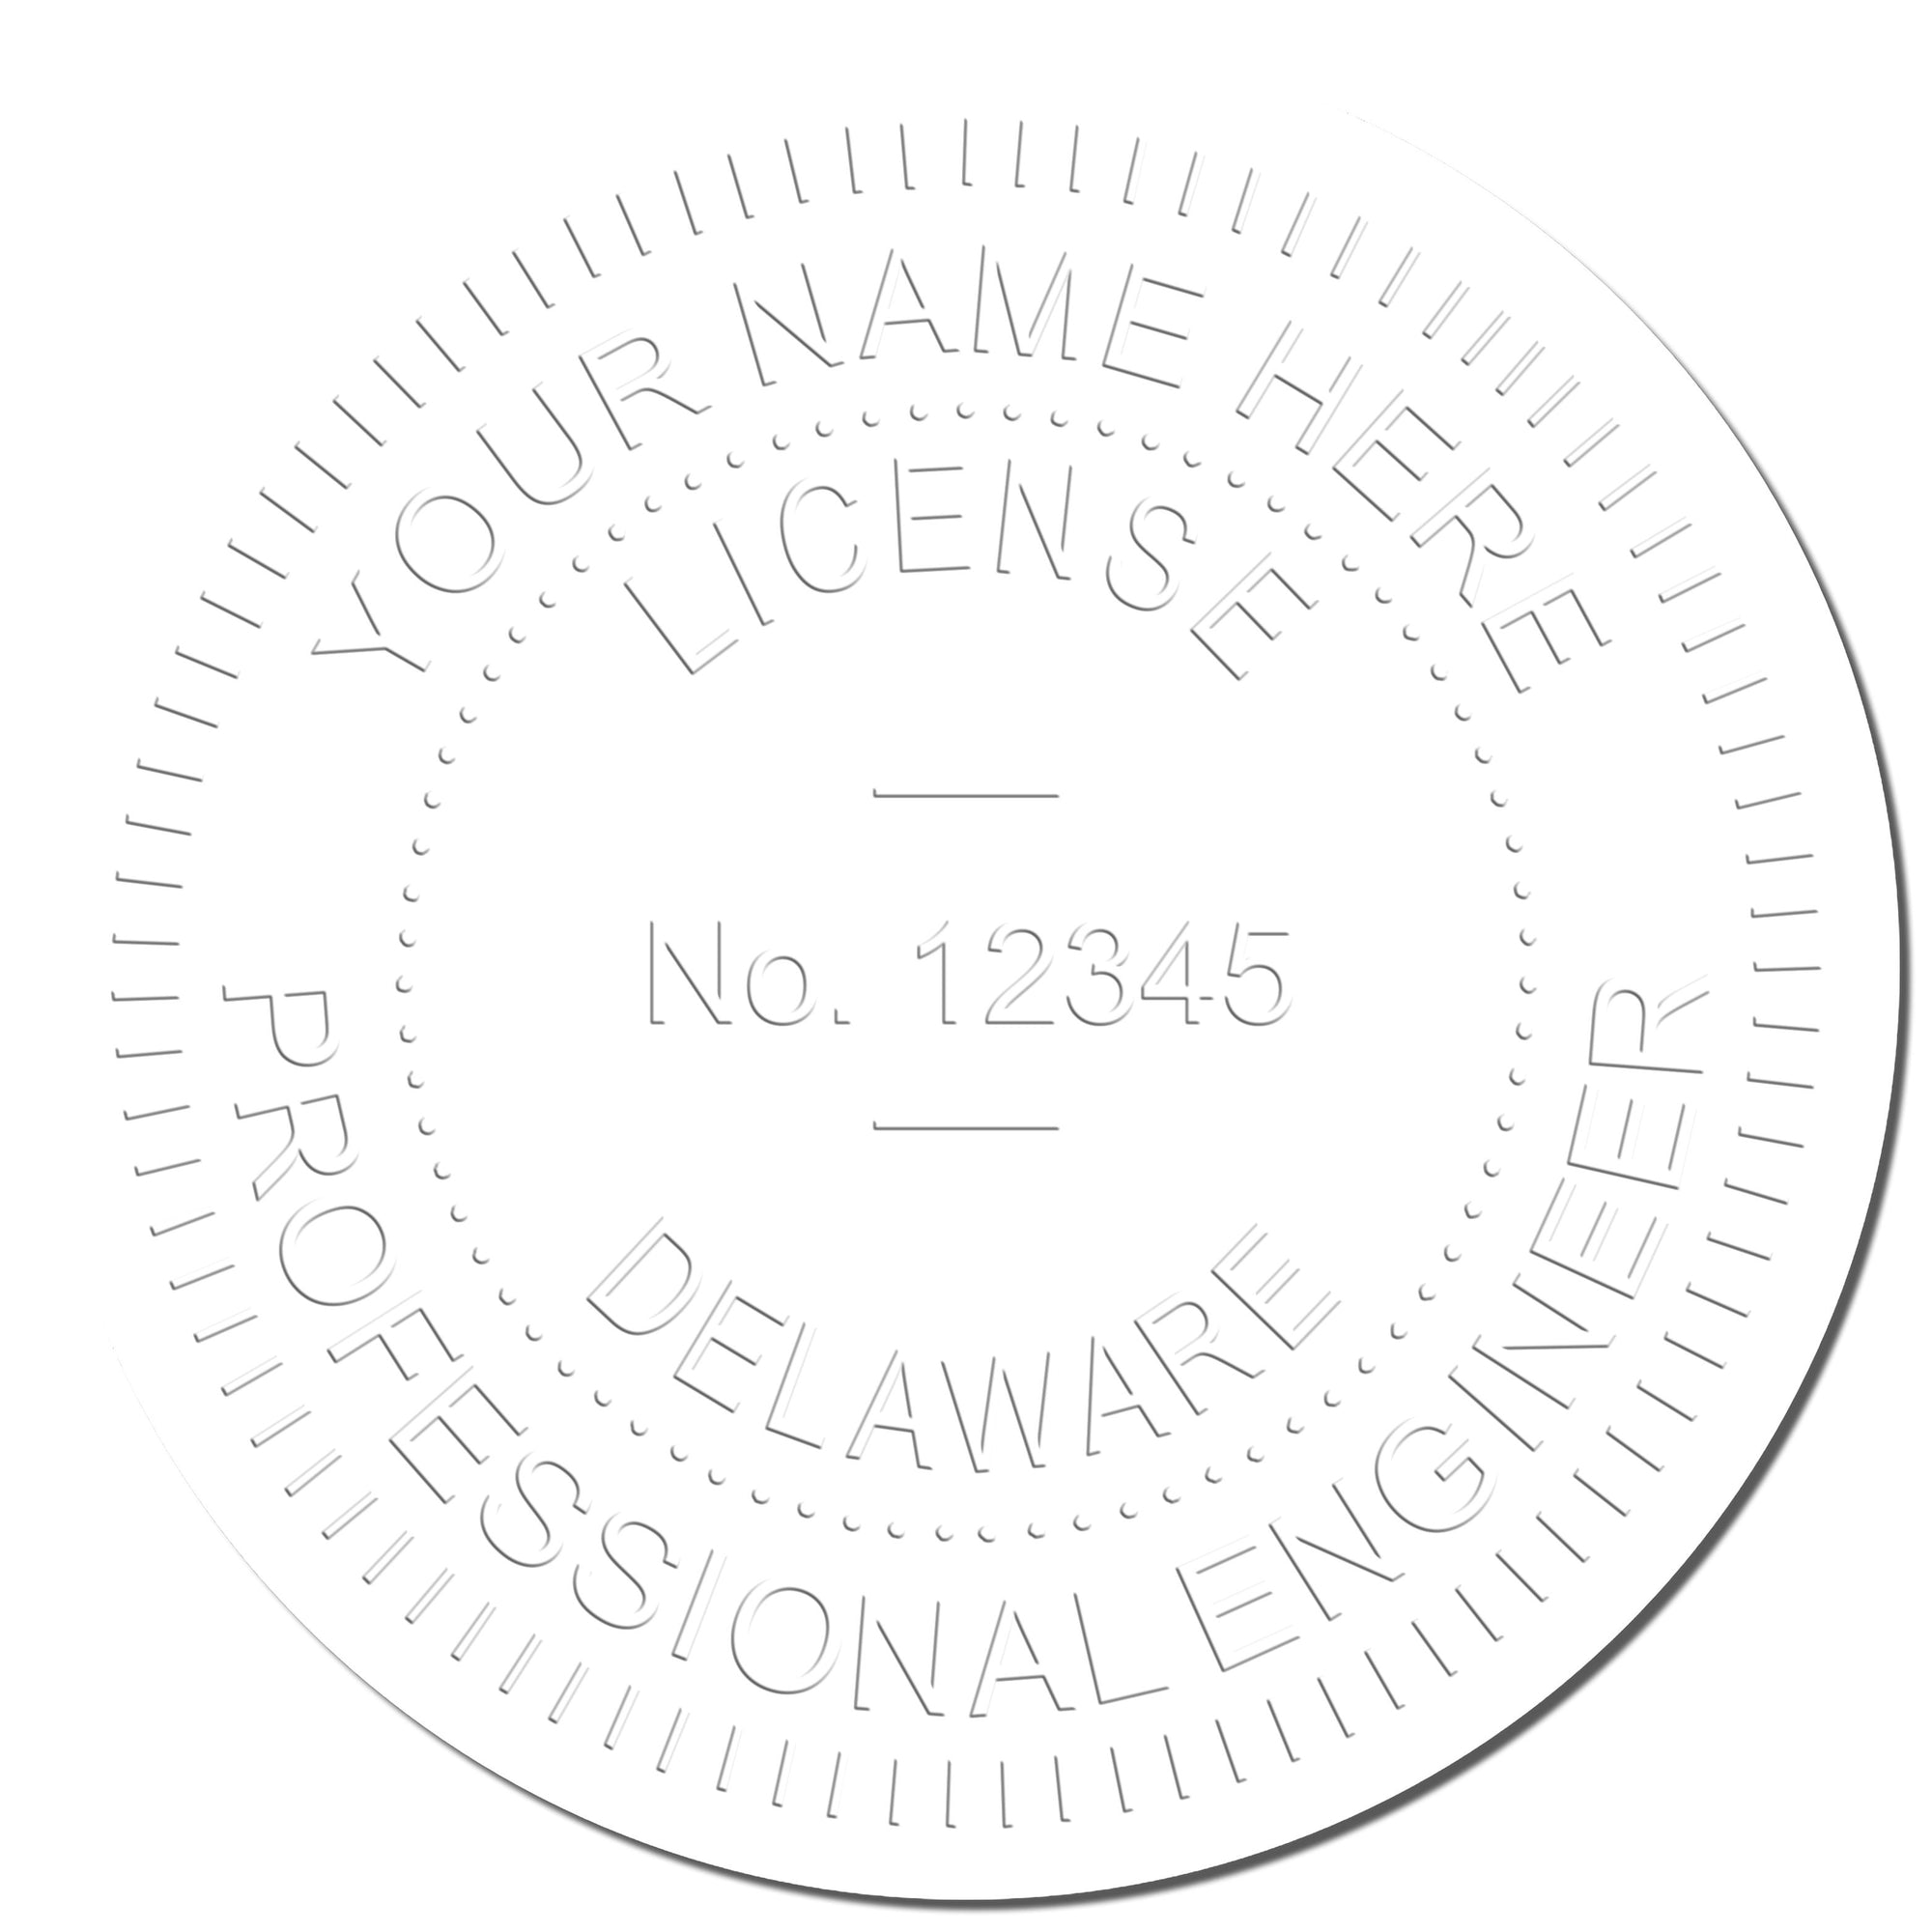 The main image for the Delaware Engineer Desk Seal depicting a sample of the imprint and electronic files